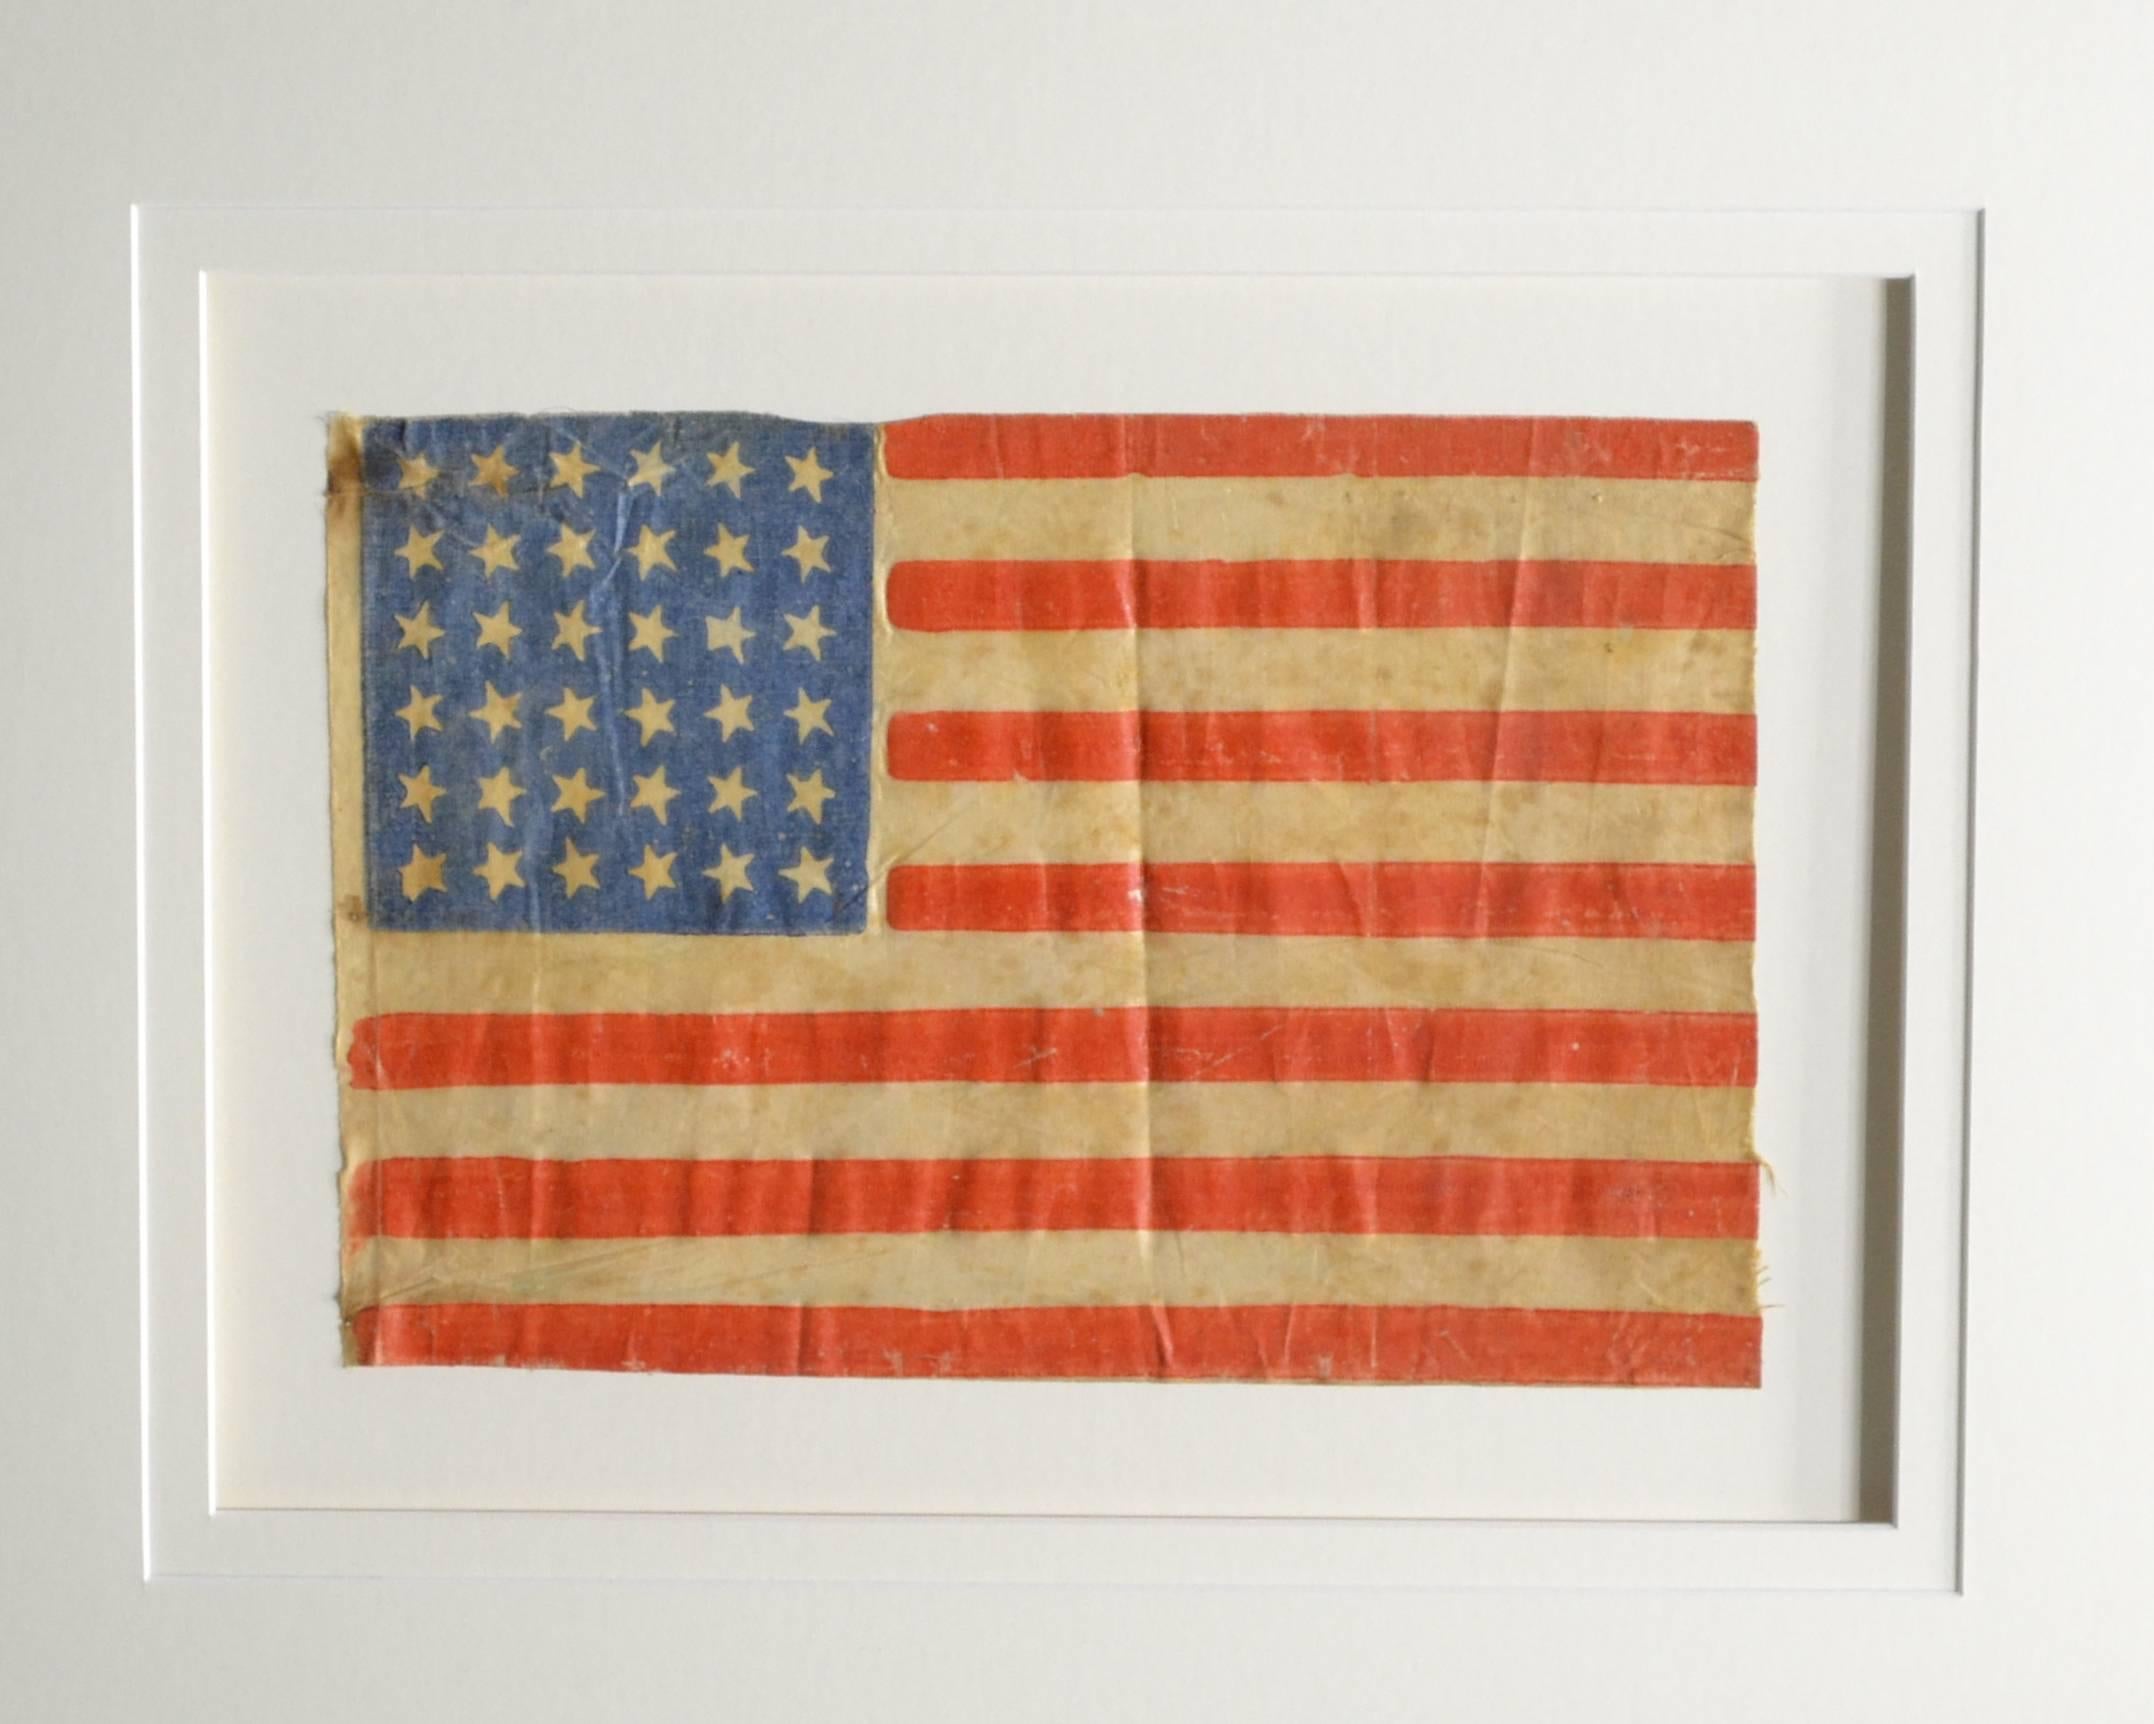 Authentic antique 36 Star Civil War era flag, circa 1864. Made of starched linen fabric. Abraham Lincoln was President when this flag was made and used. Flag is 7